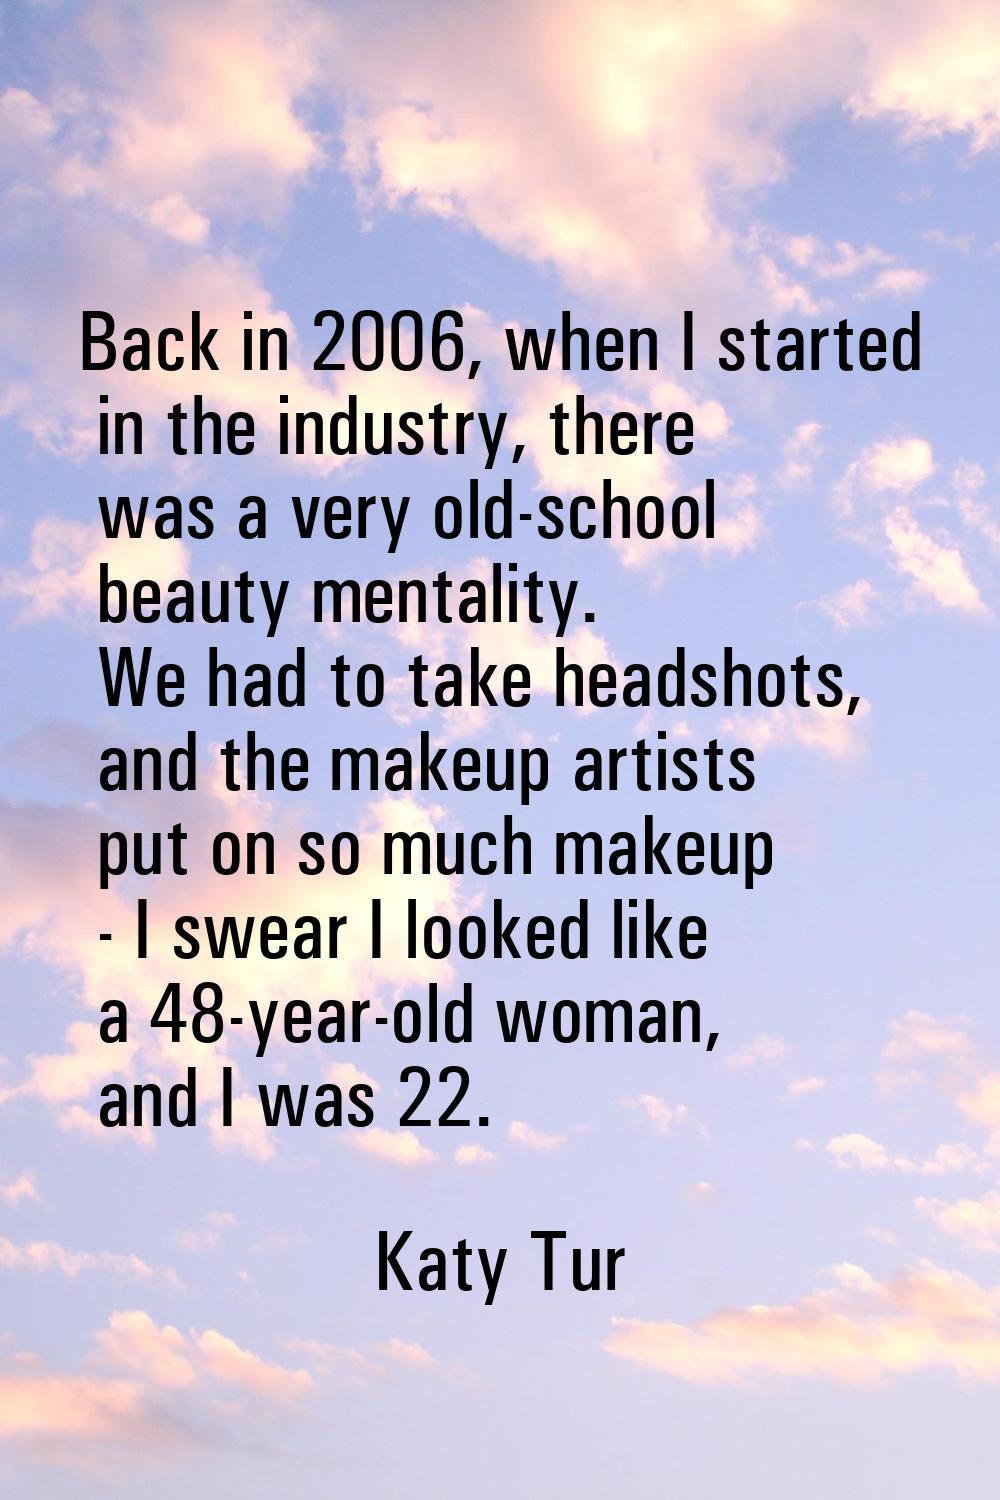 Back in 2006, when I started in the industry, there was a very old-school beauty mentality. We had 